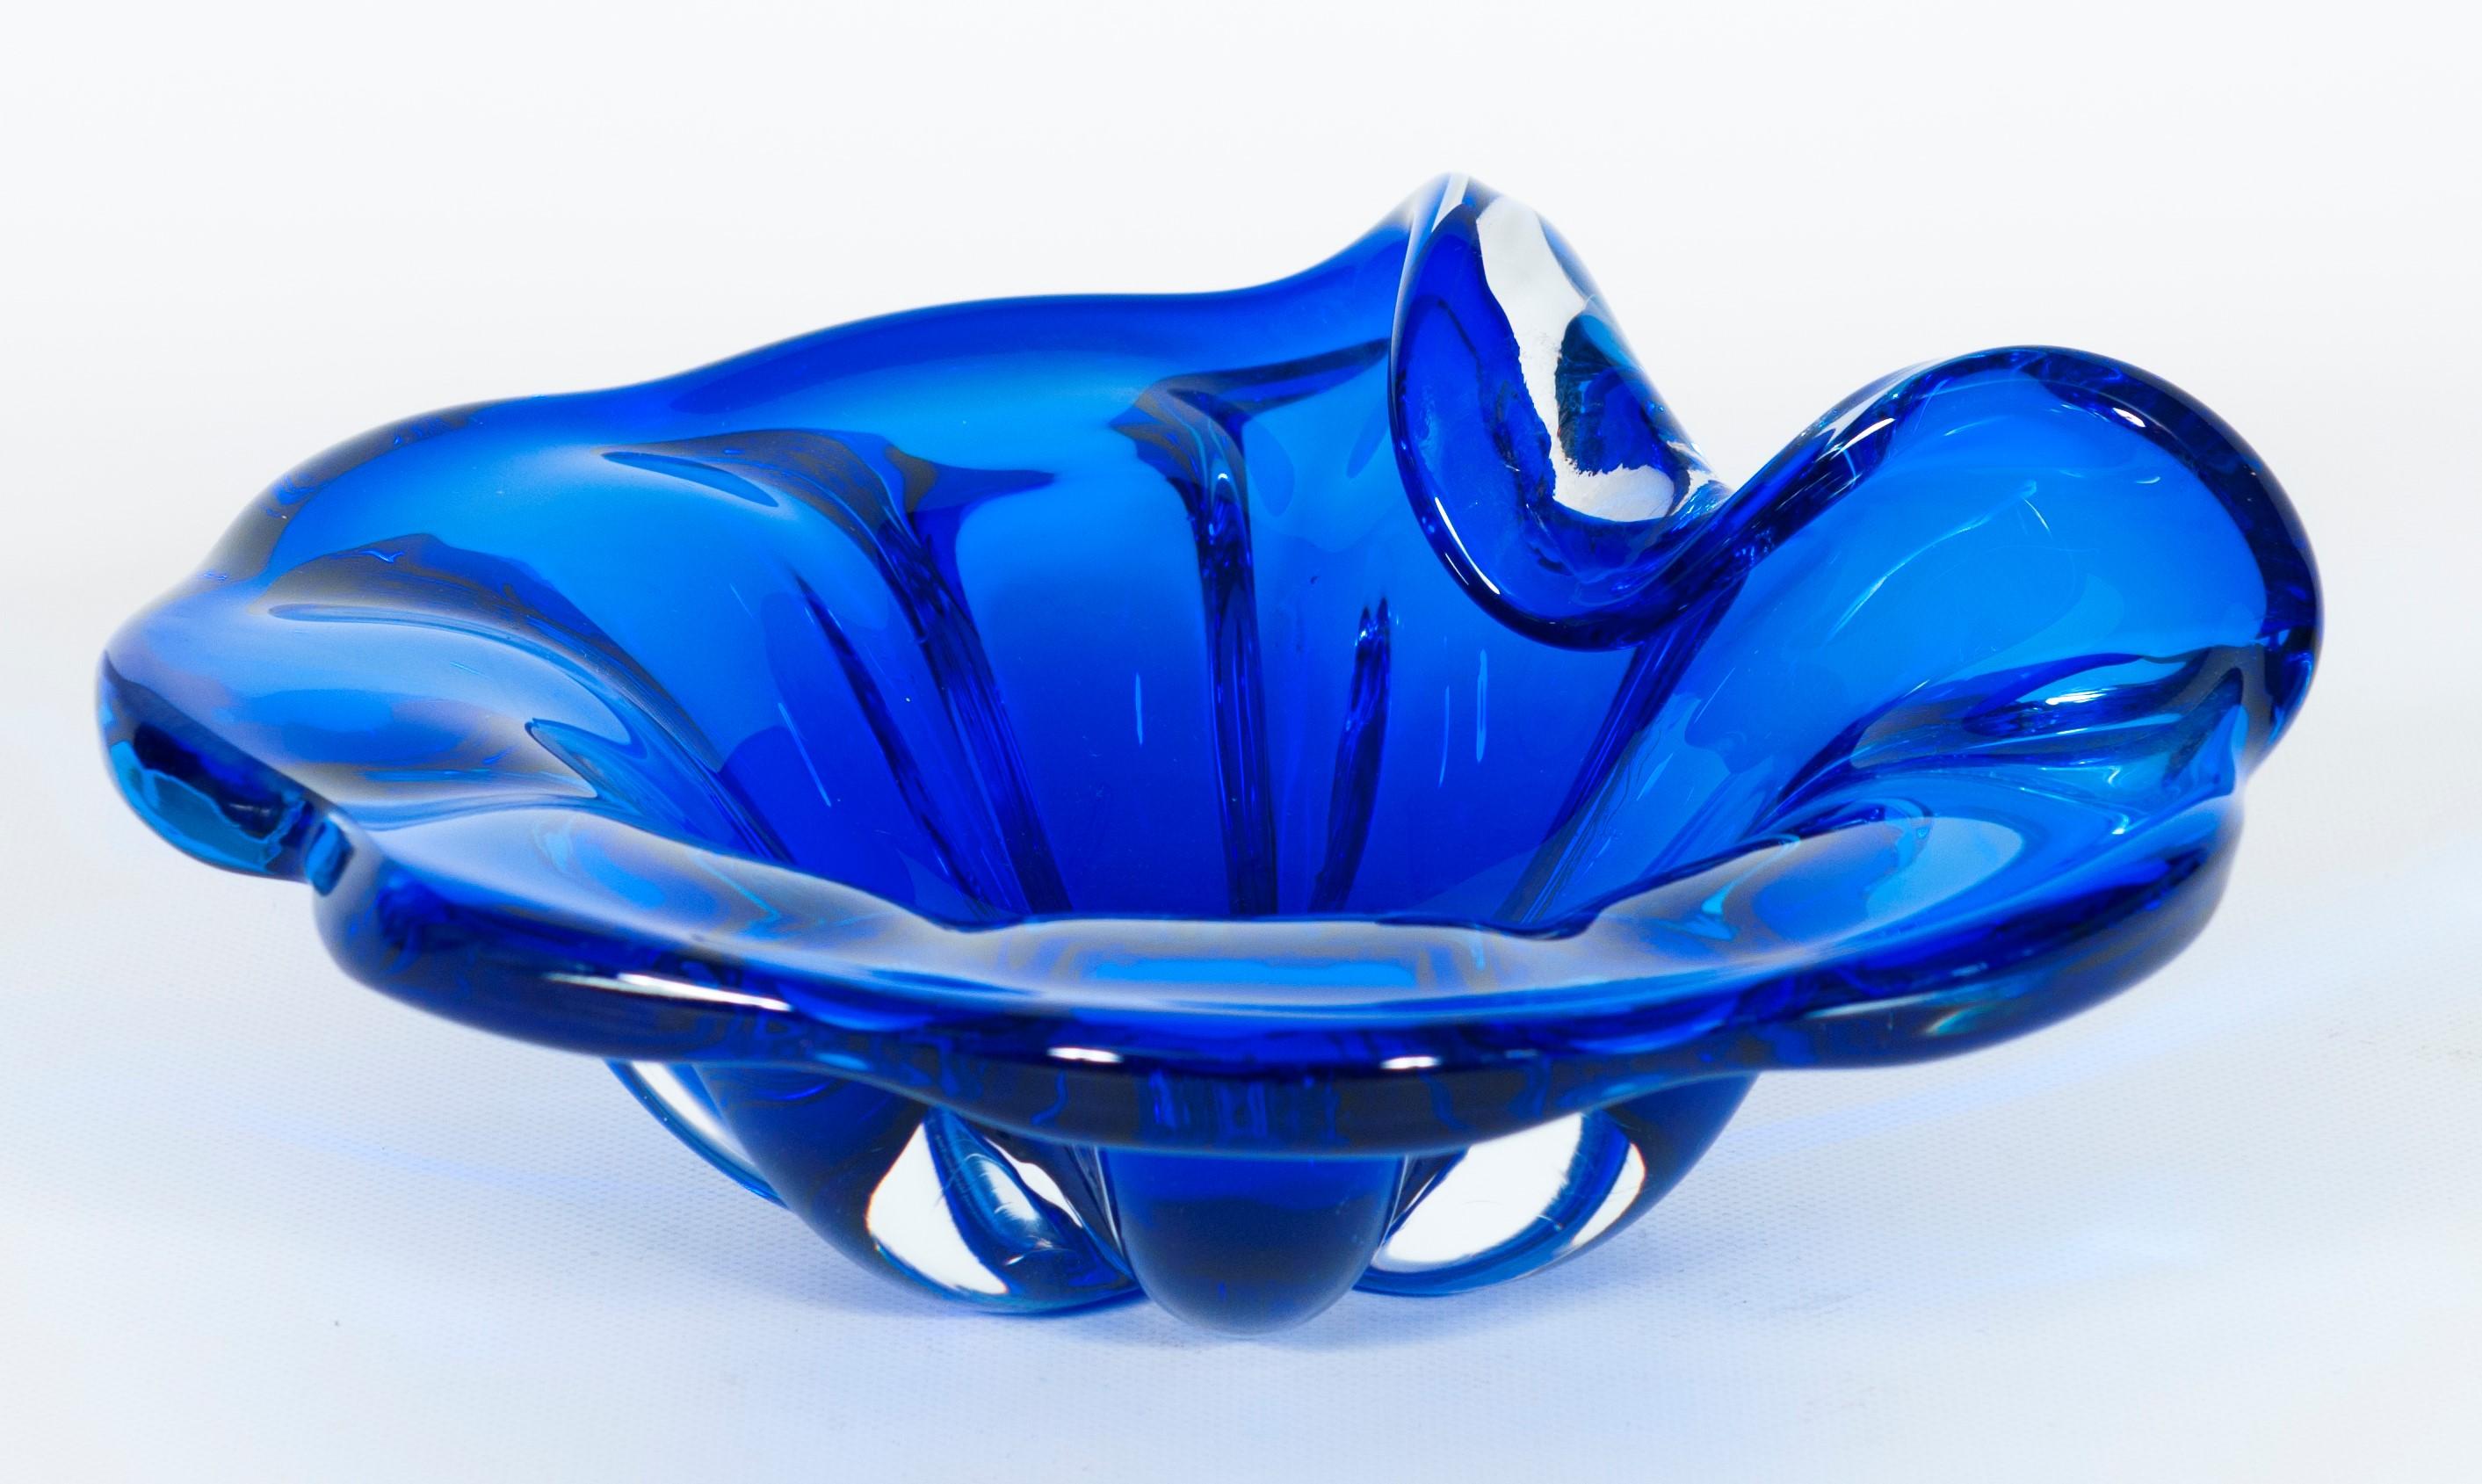 Blue vintage Murano glass centerpiece by Alberto Donà, 1980s Italy.
This superb Venetian centerpiece steals the scene, thanks to its vivid color and its delicate flower shape. This artwork was entirely handcrafted in the 1980s in the Italian island